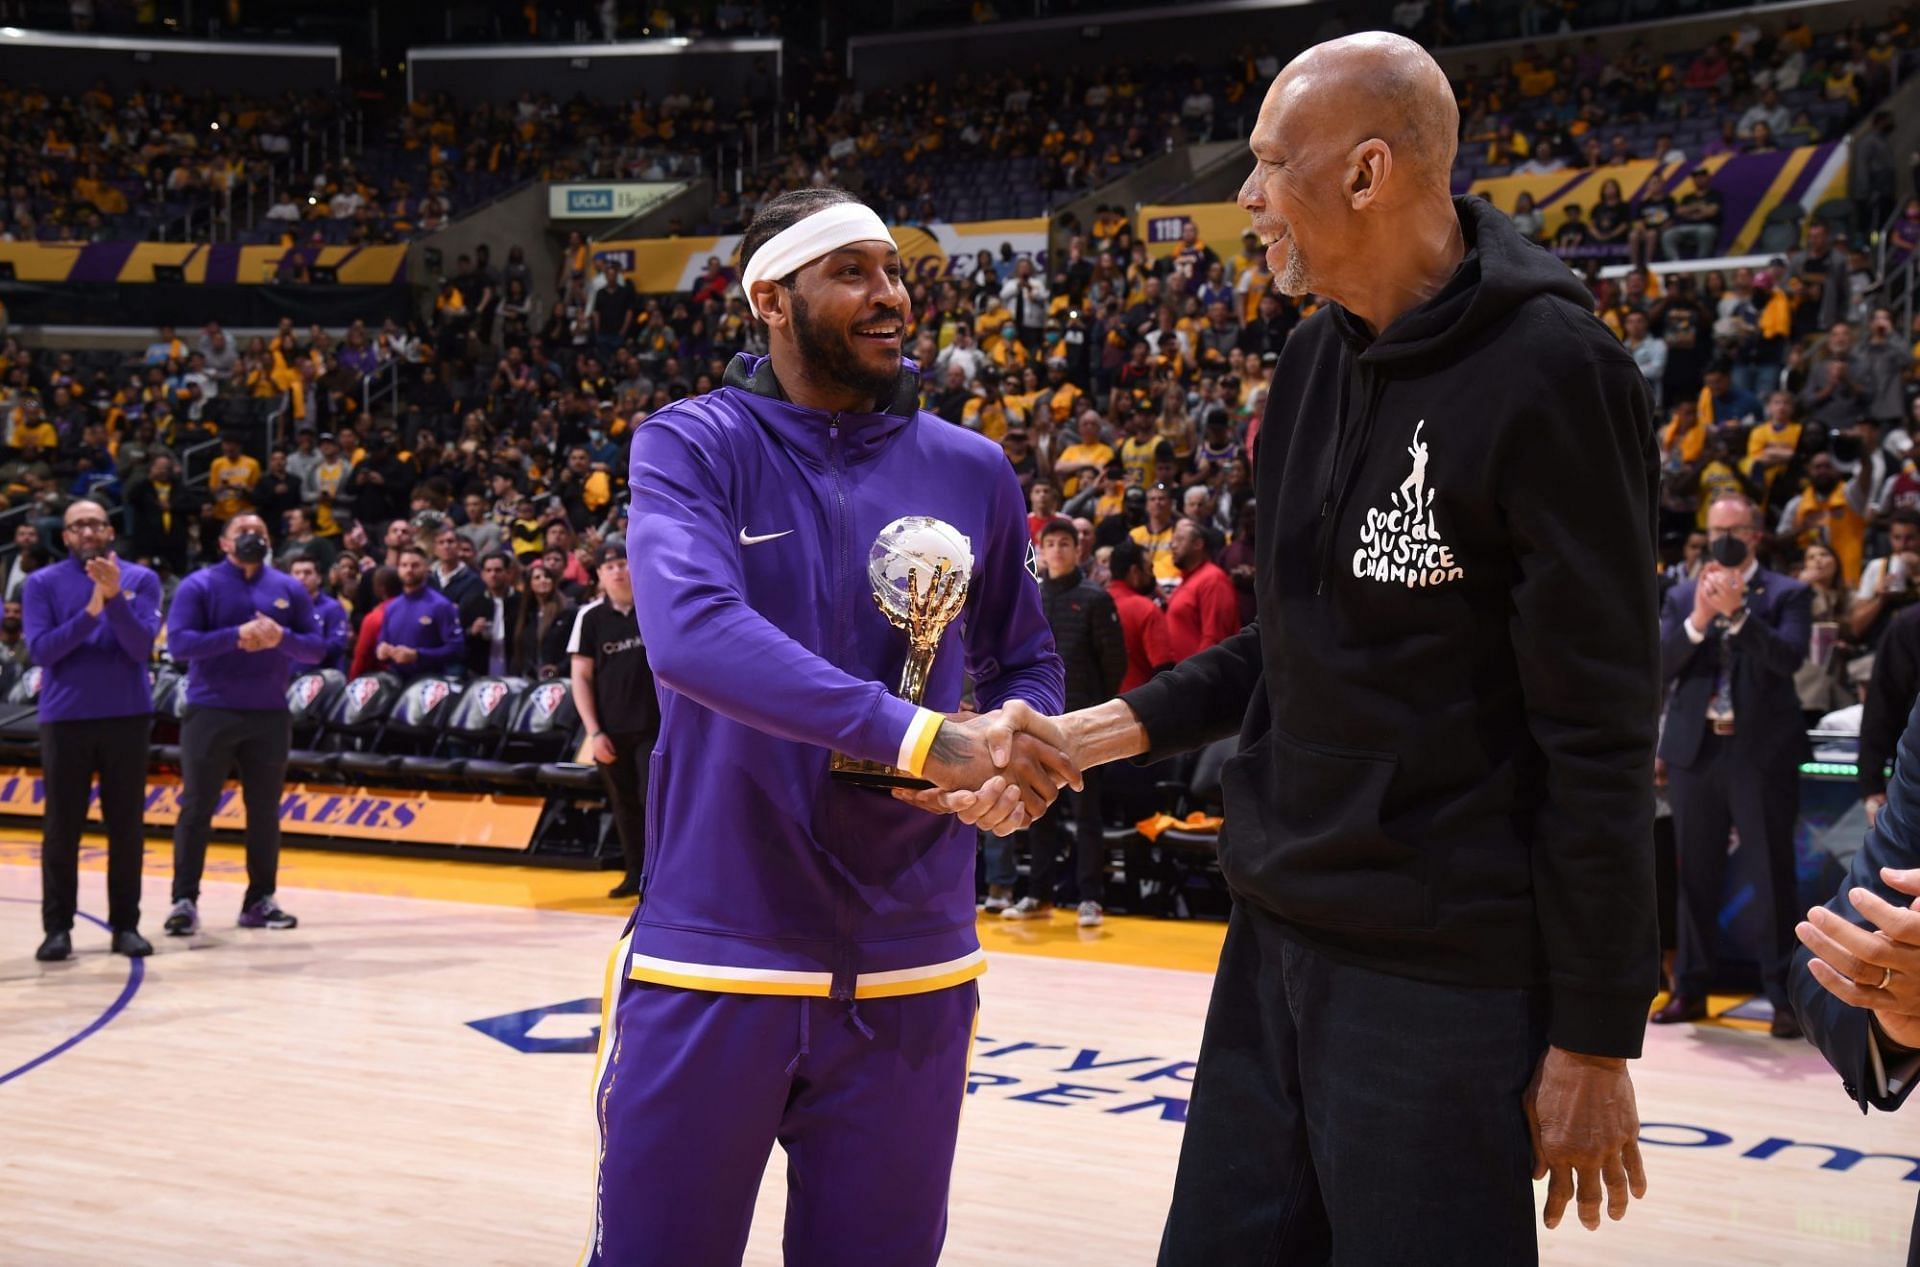 Carmelo Anthony is the first recipient of the Kareem Abdul-Jabbar Social Justice Award[Photo: New York Post]